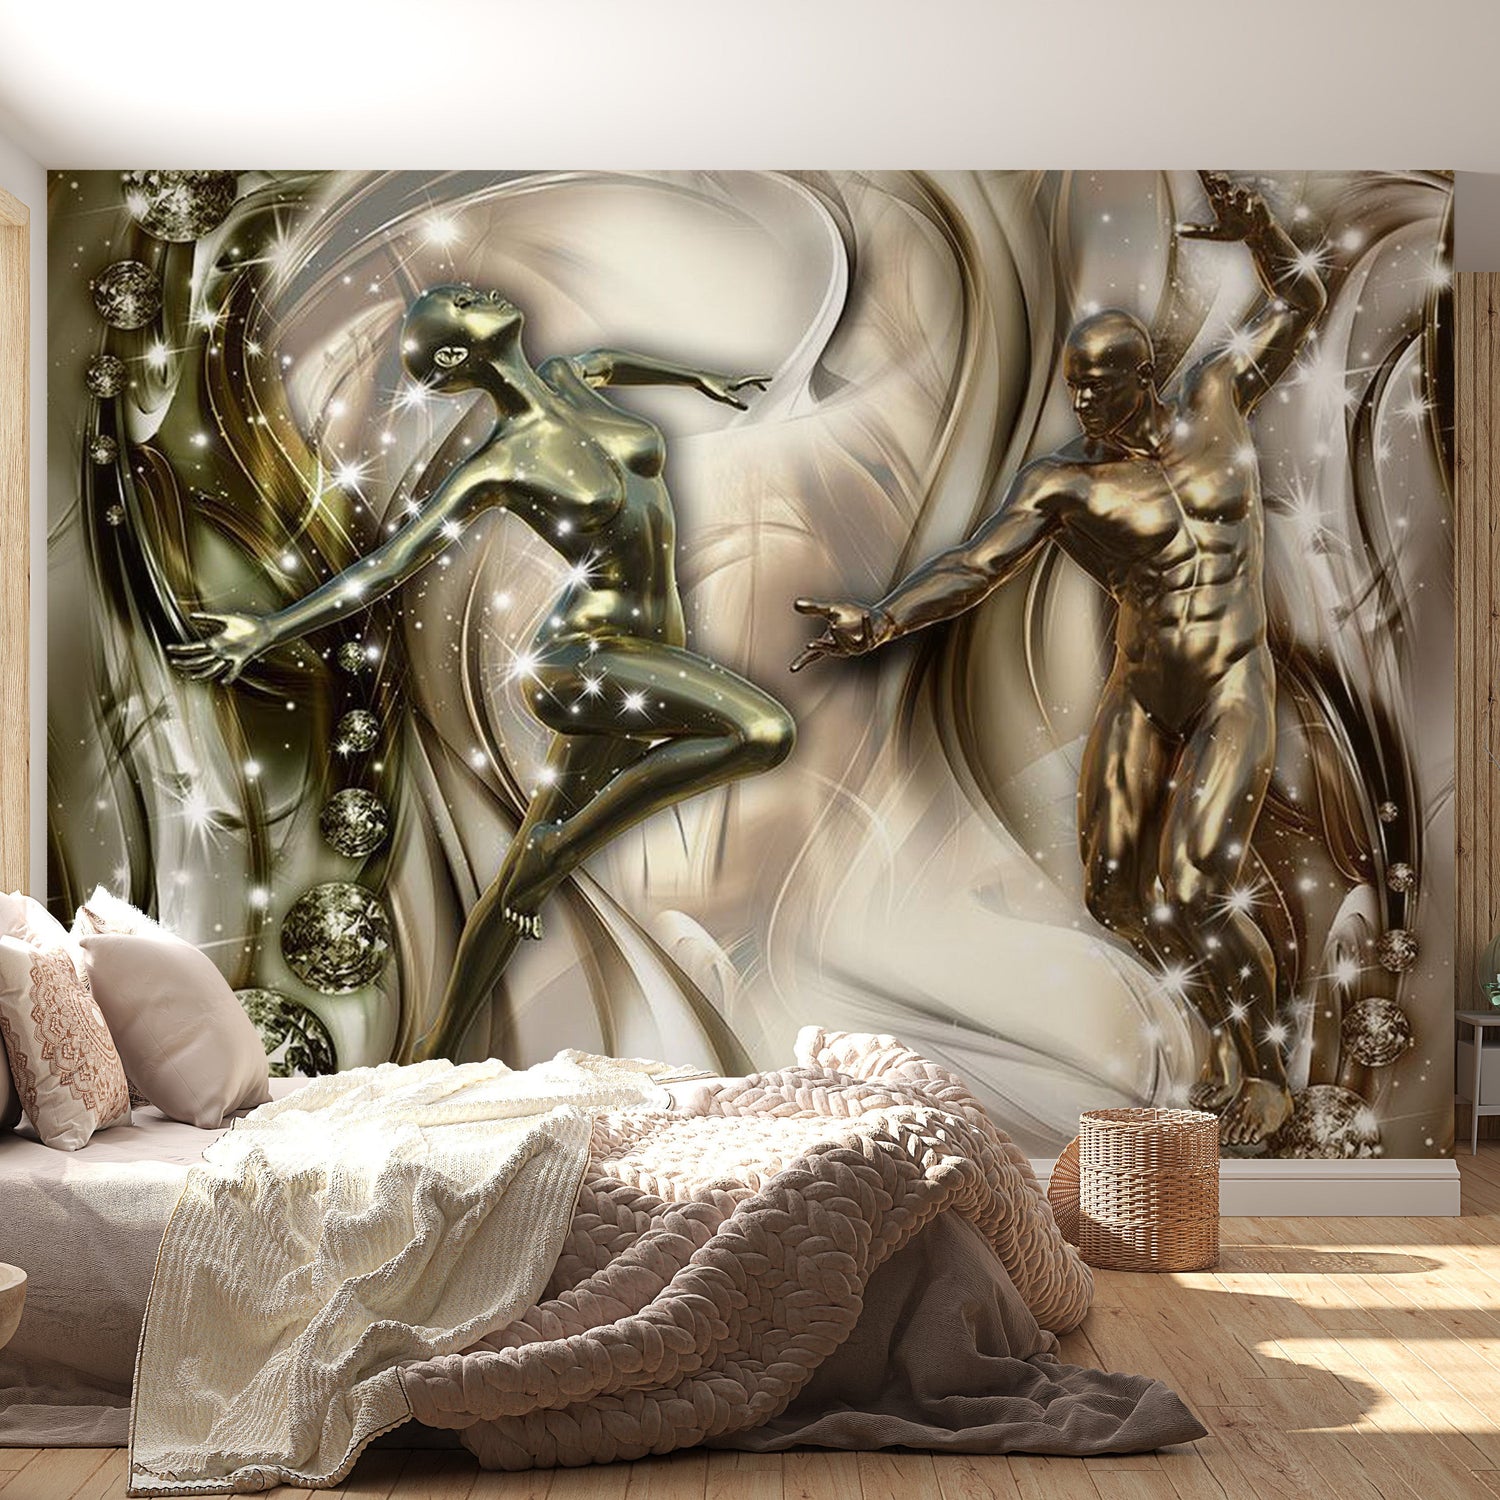 Peel & Stick Glam Wall Mural - Energy Of Passion - Removable Wall Decals